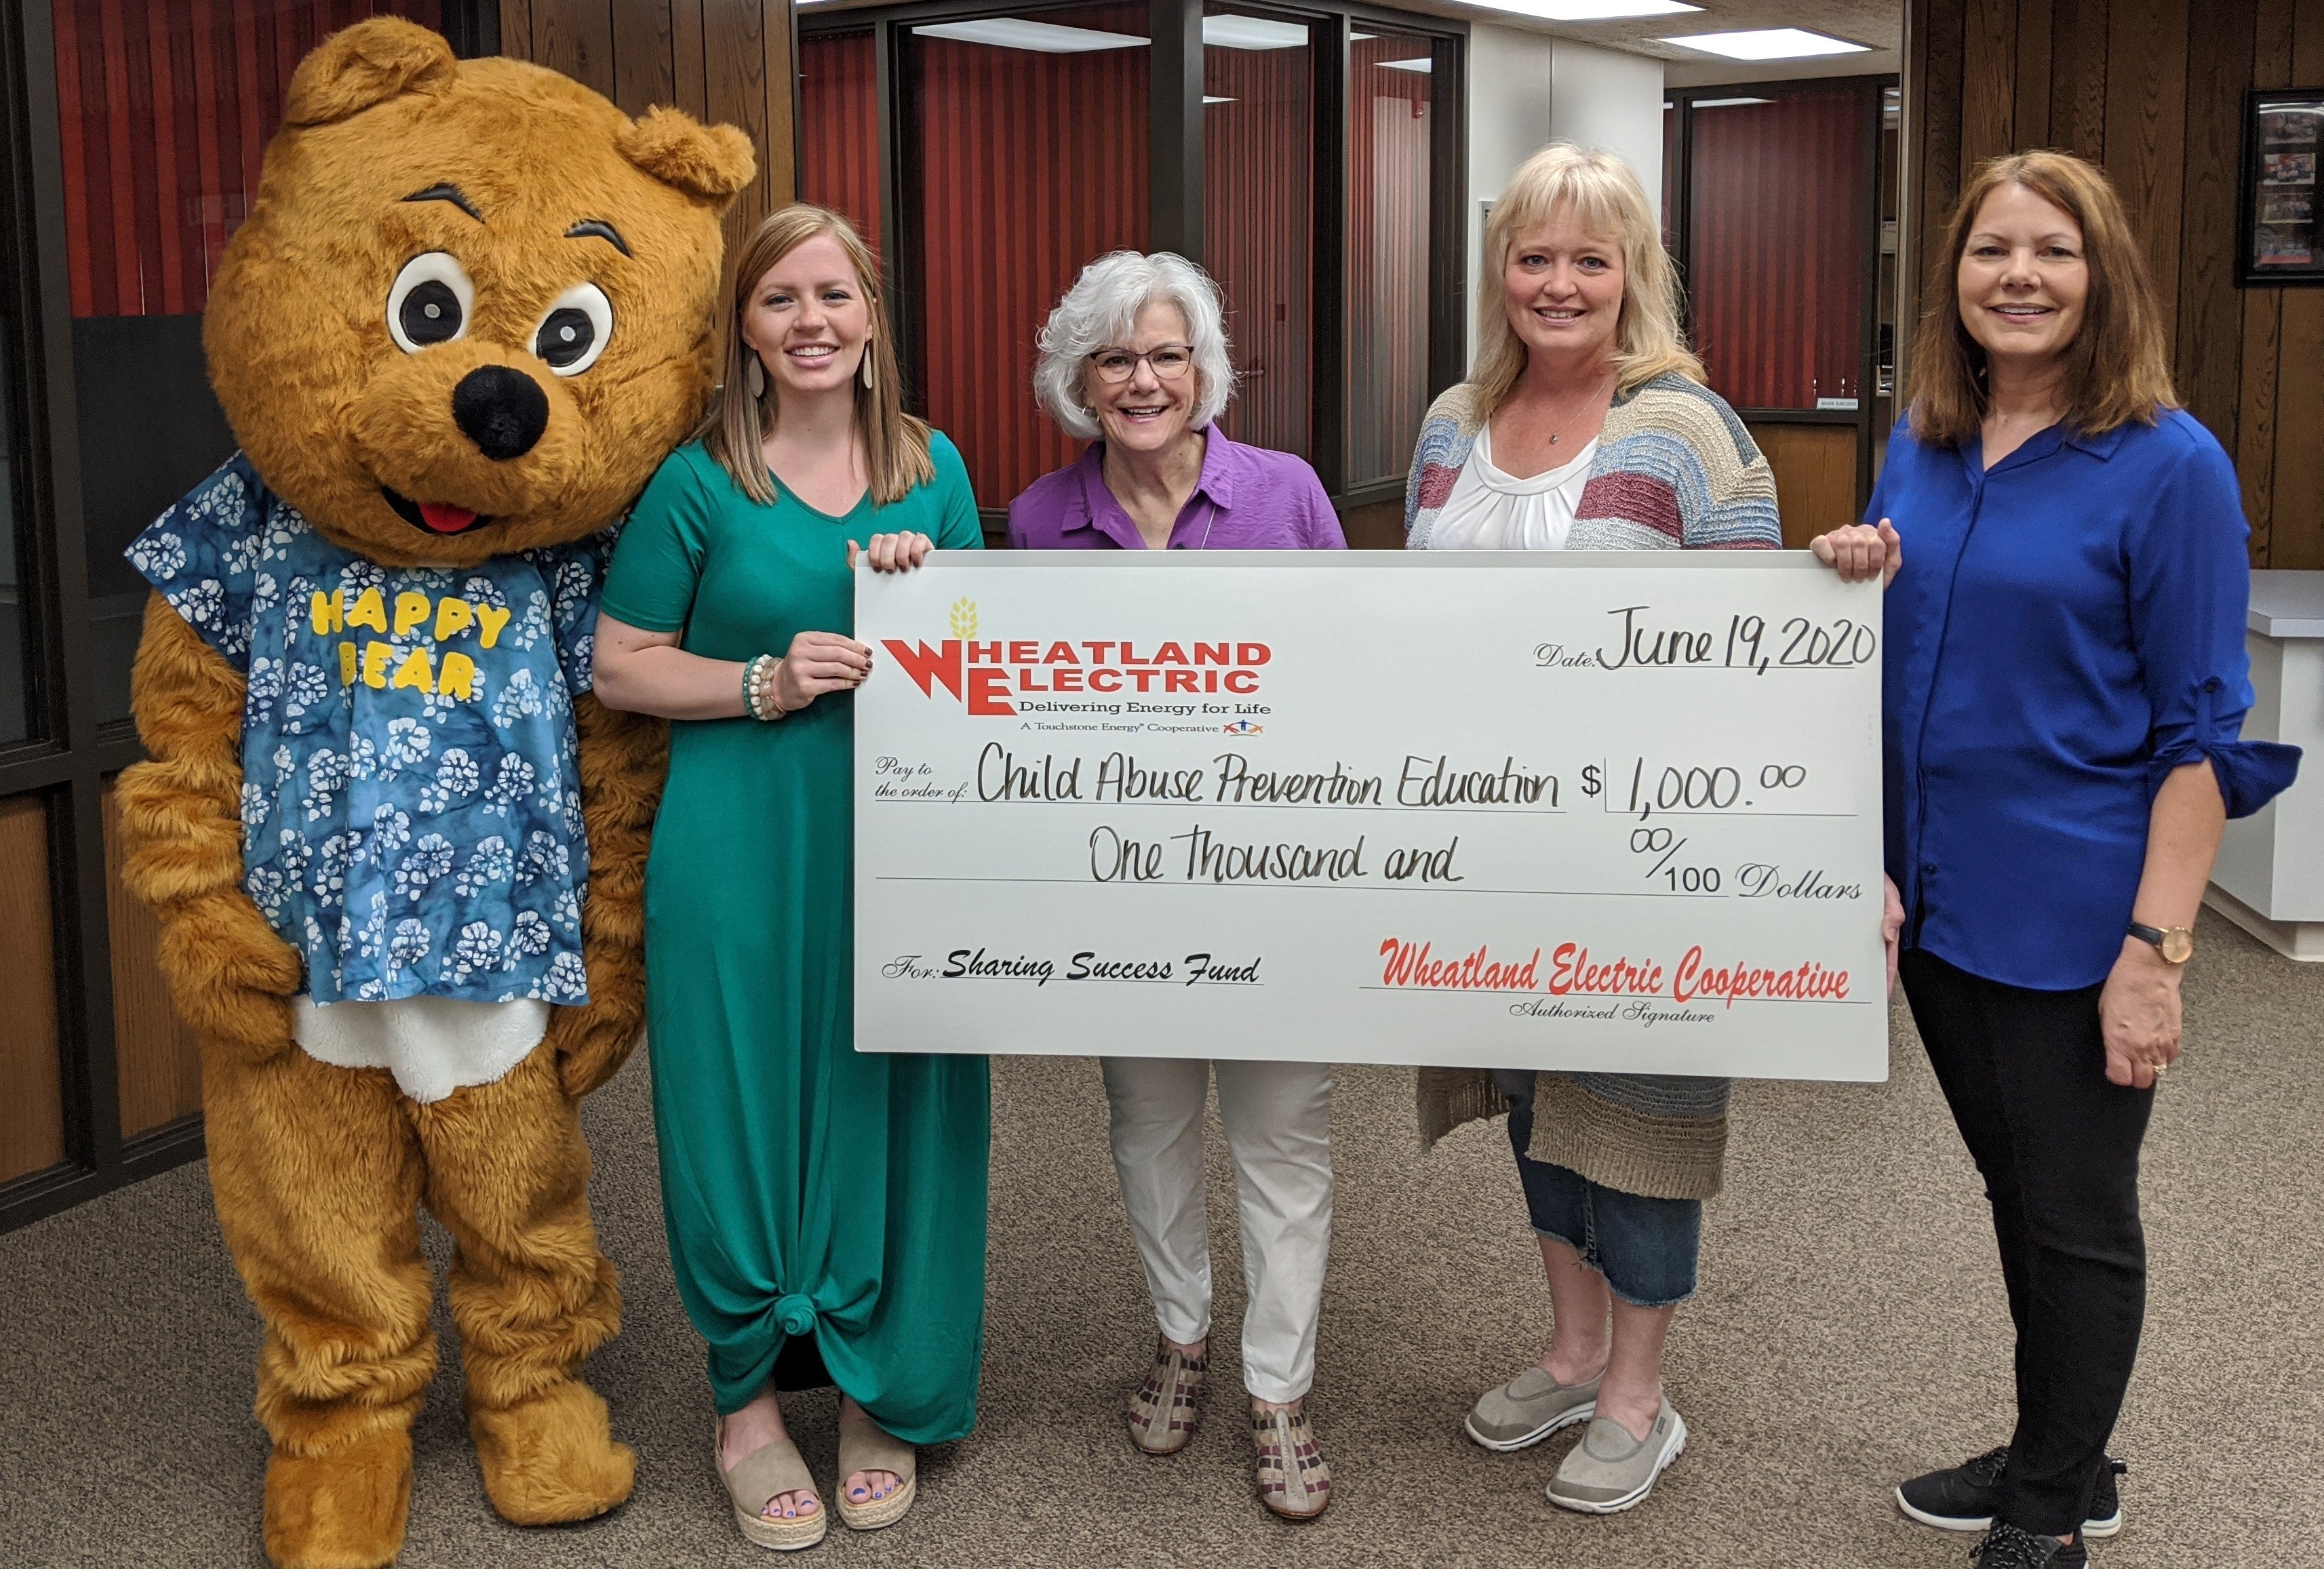 Several Board Members from CAPE gathered to accept their $1,000 Sharing Success Grant from Wheatland Electric on June 19, 2020. Pictured from left to right are Happy Bear (Mary Johnson), Regan Reif, Member Services and Key Accounts Manager for Wheatland Electric, Judy Johnson, CAPE Director, Shala Ehrlich, CAPE Treasurer, and Sheryl Neeland, CAPE Board President.